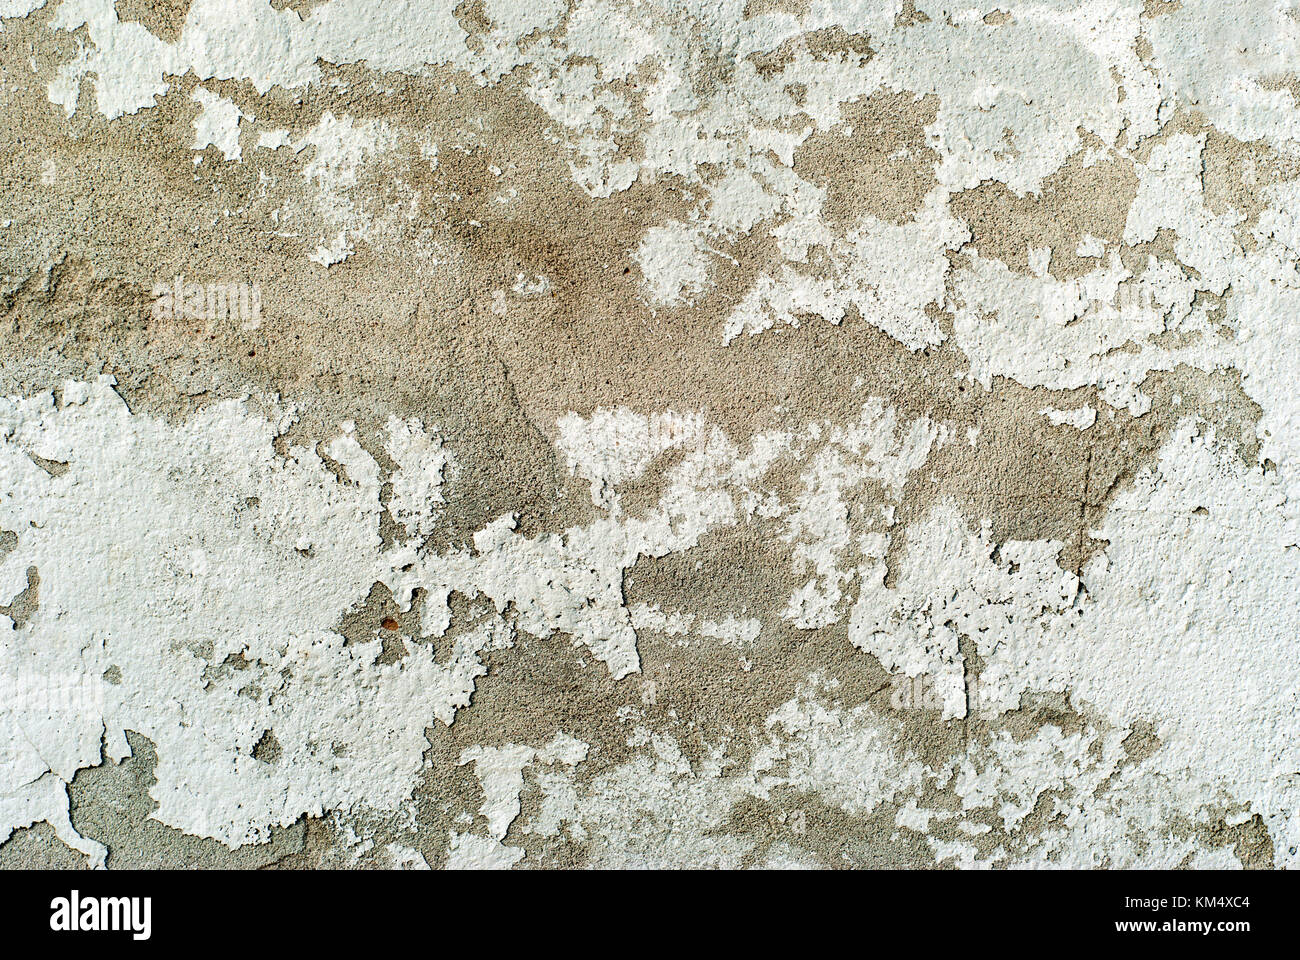 texture, background: old concrete wall with peeling plaster and crumbling whitewash Stock Photo